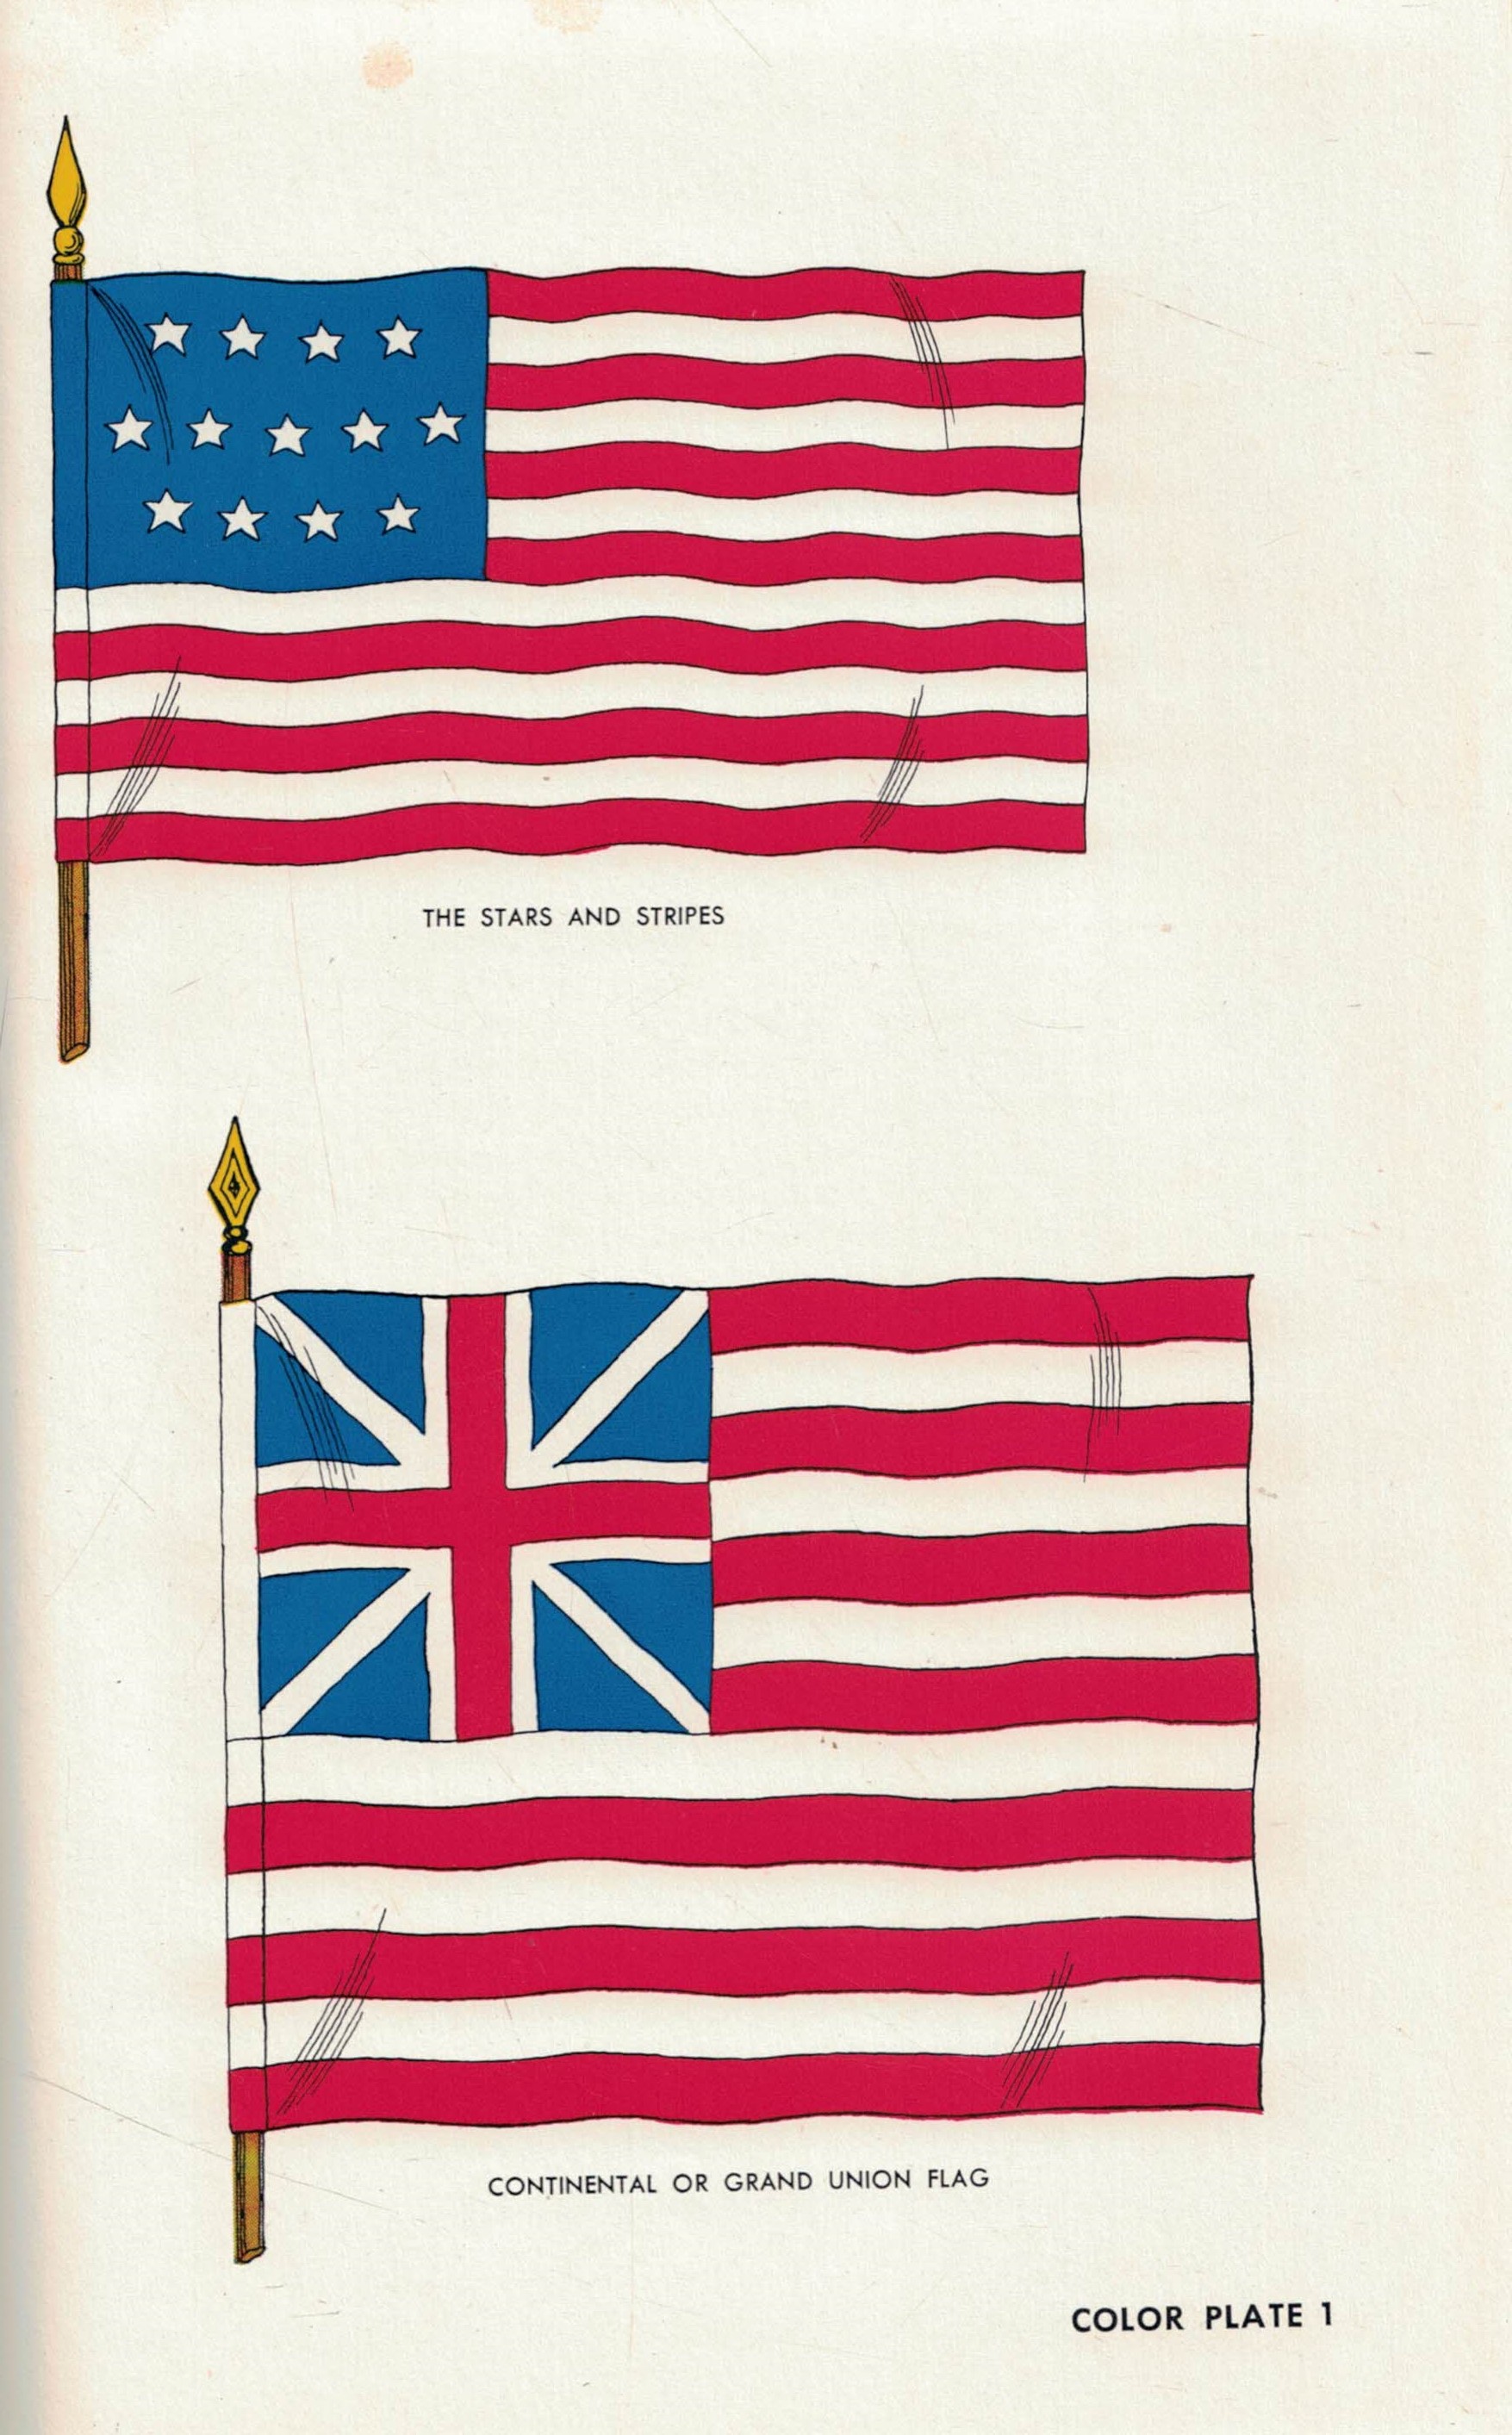 American and French Flags of the Revolution. 1775-1783.